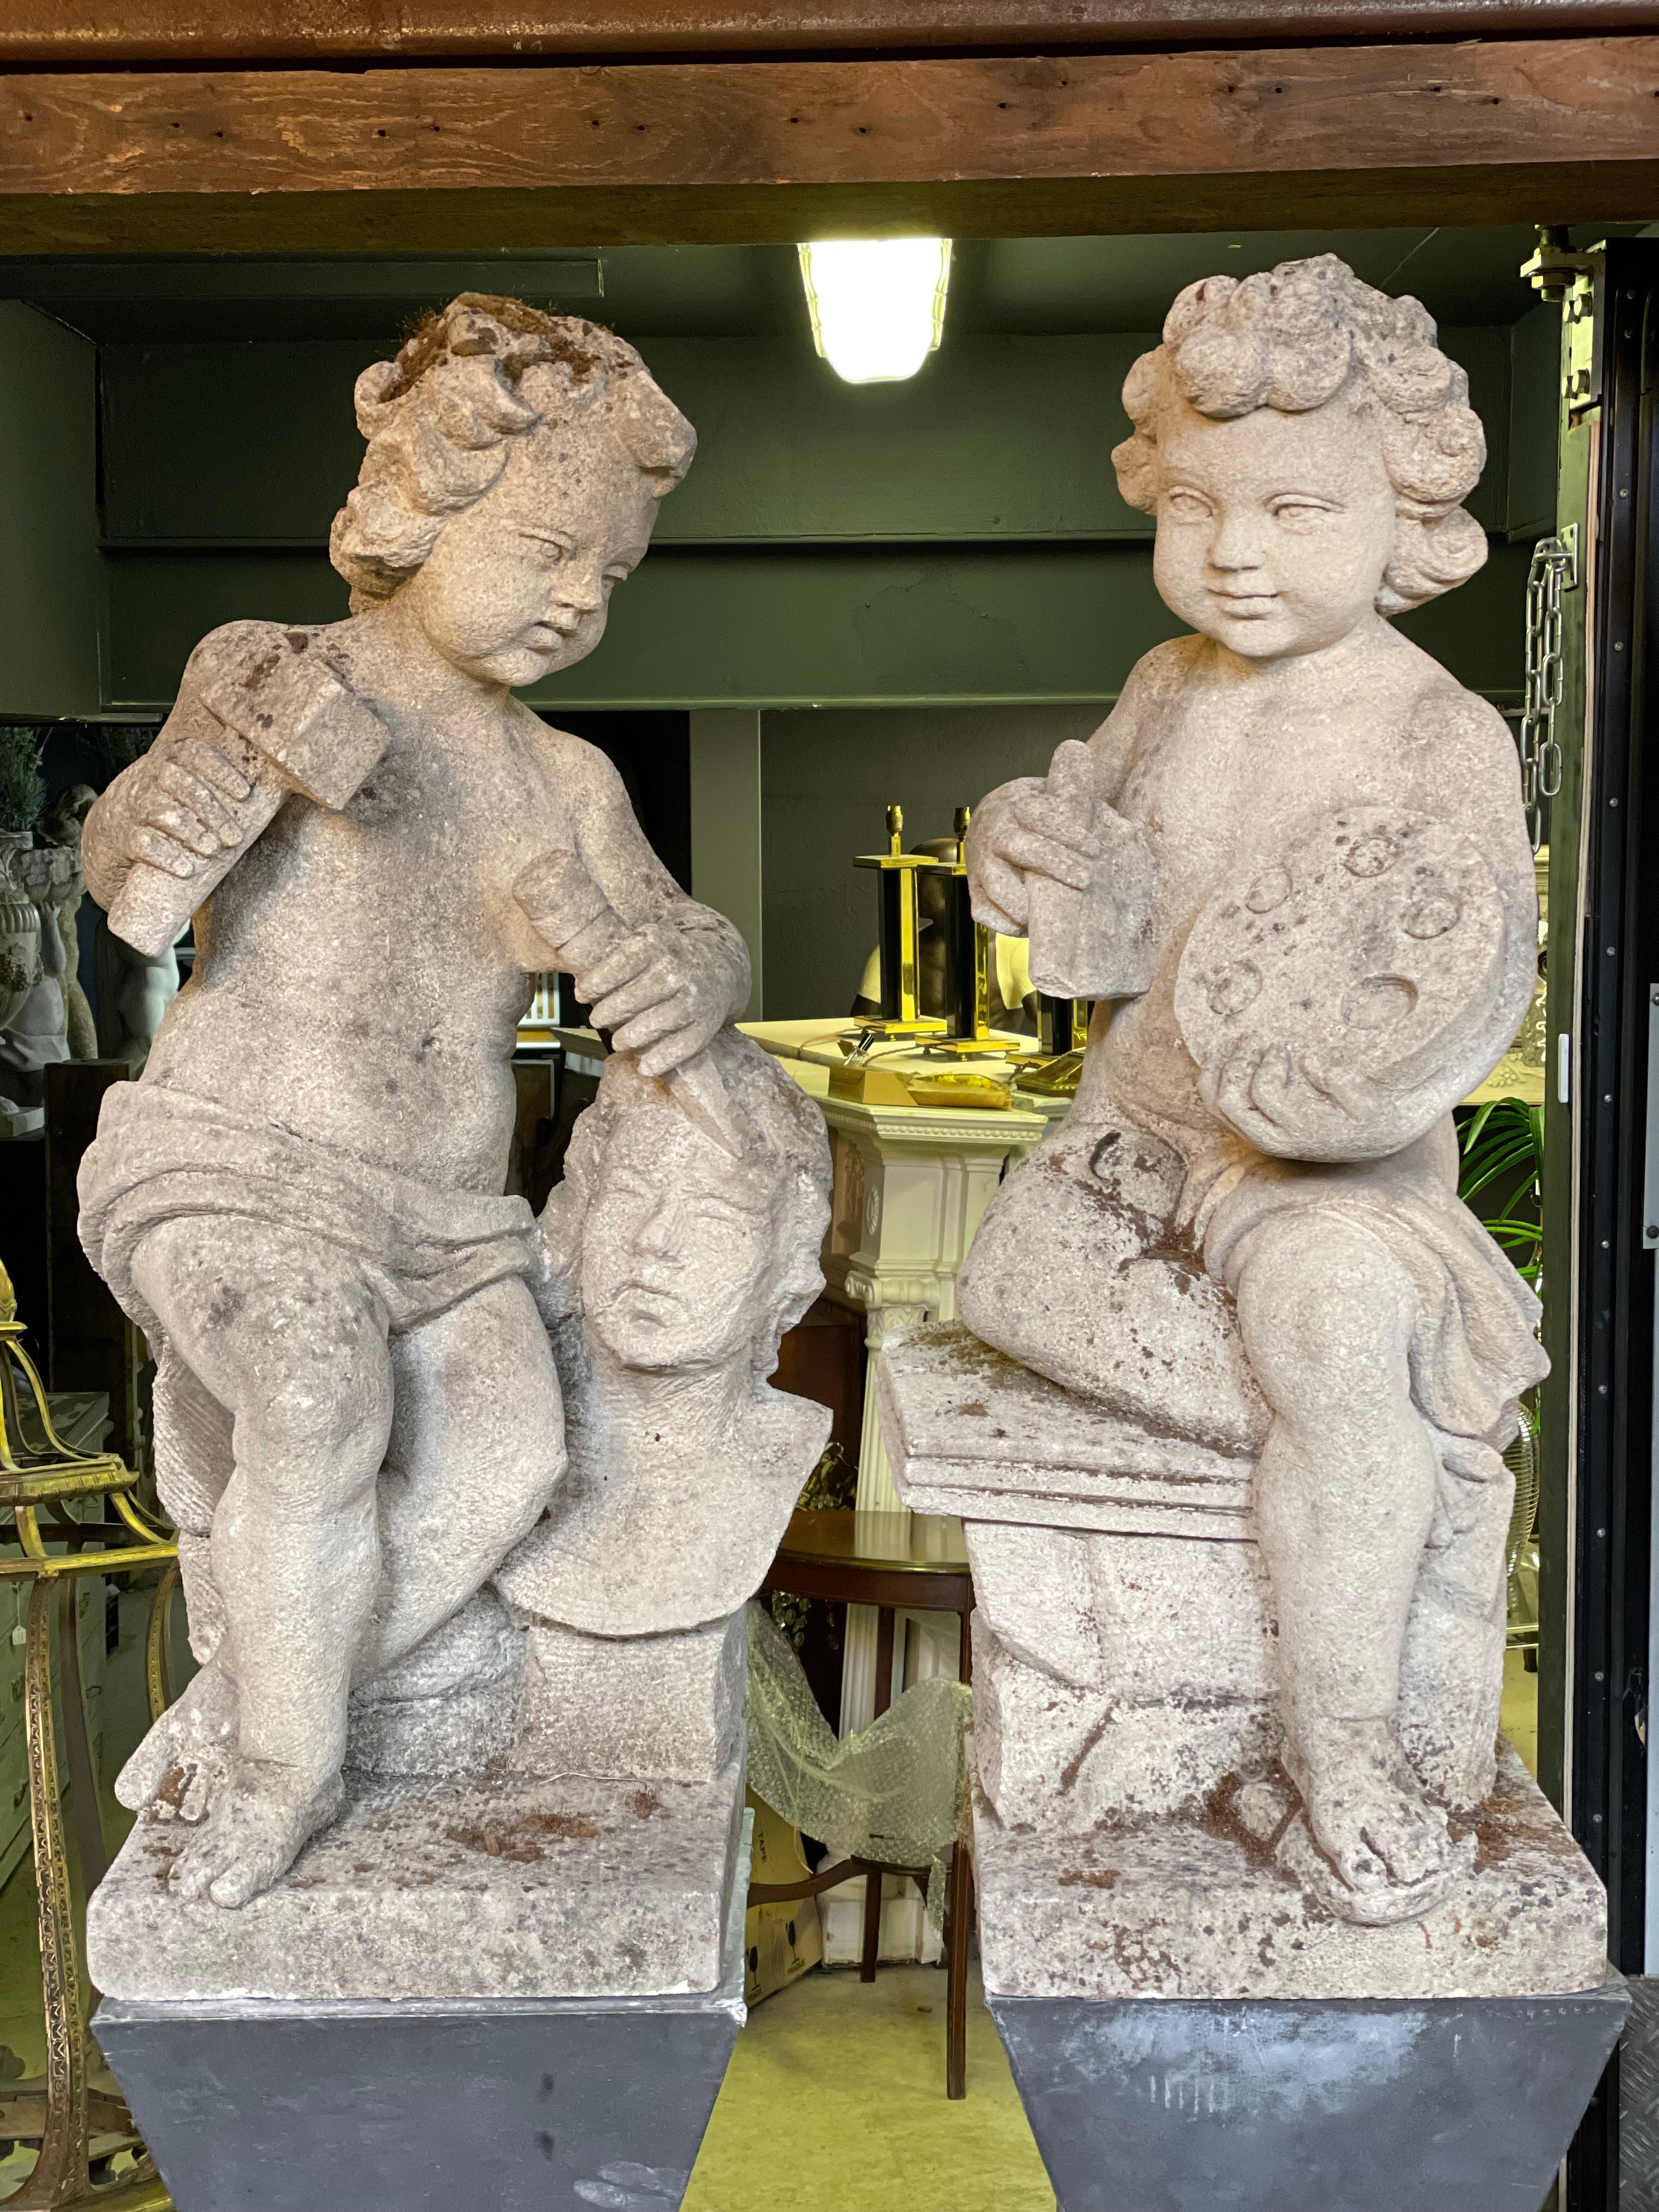 A stunning pair of 20th century carved stone Putti.

One of the Putti is busy carving a bust while the other Putti appears to have a set for painting.